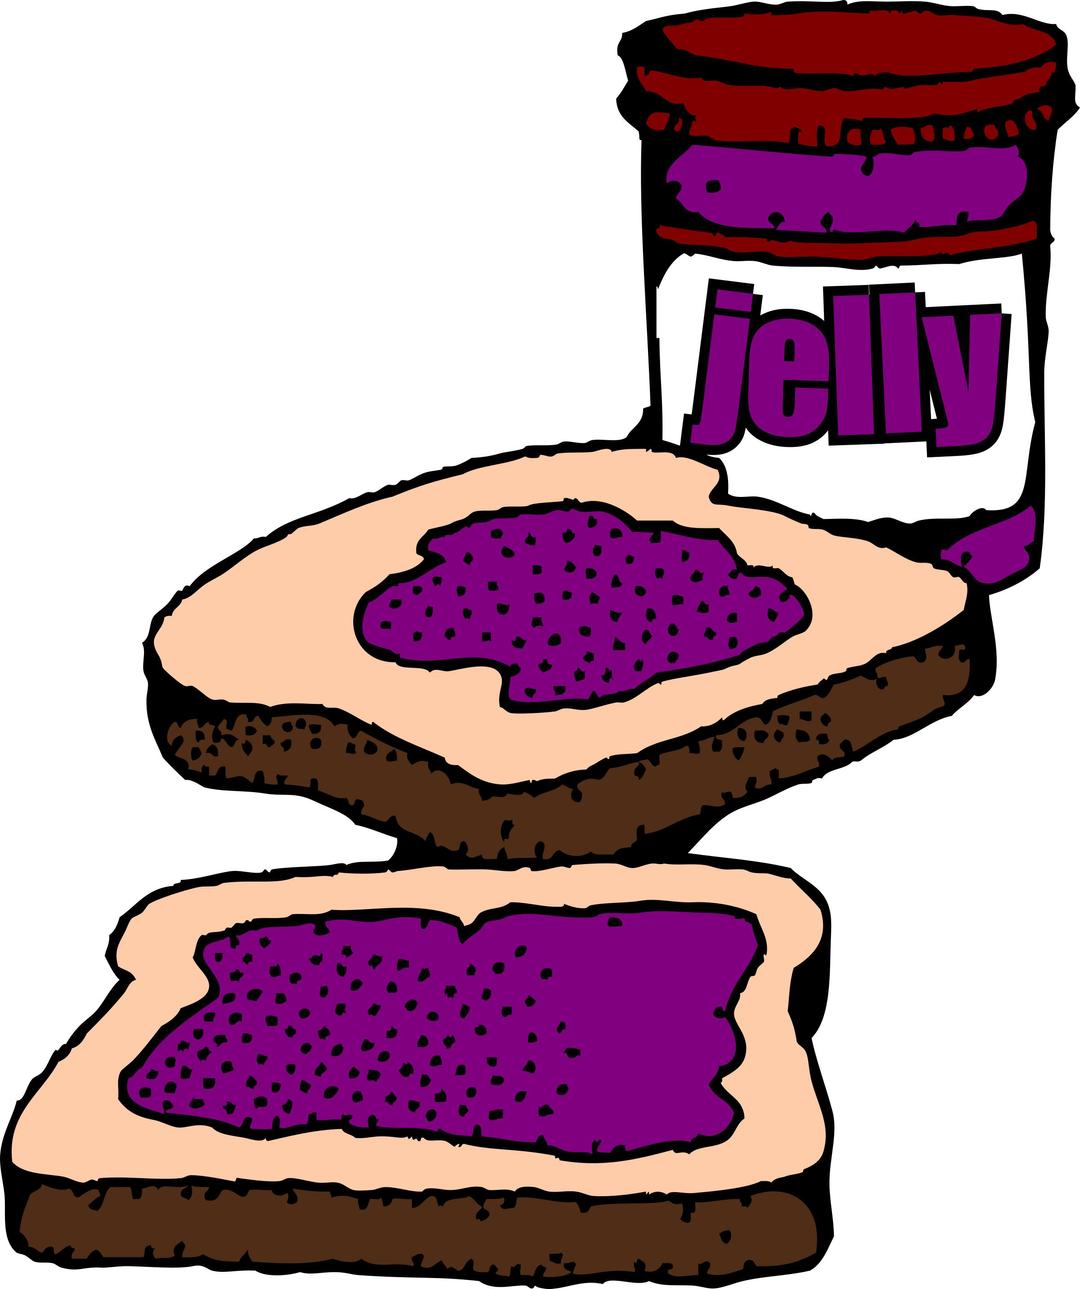 Colorized Peanut butter and jelly sandwich with label png transparent